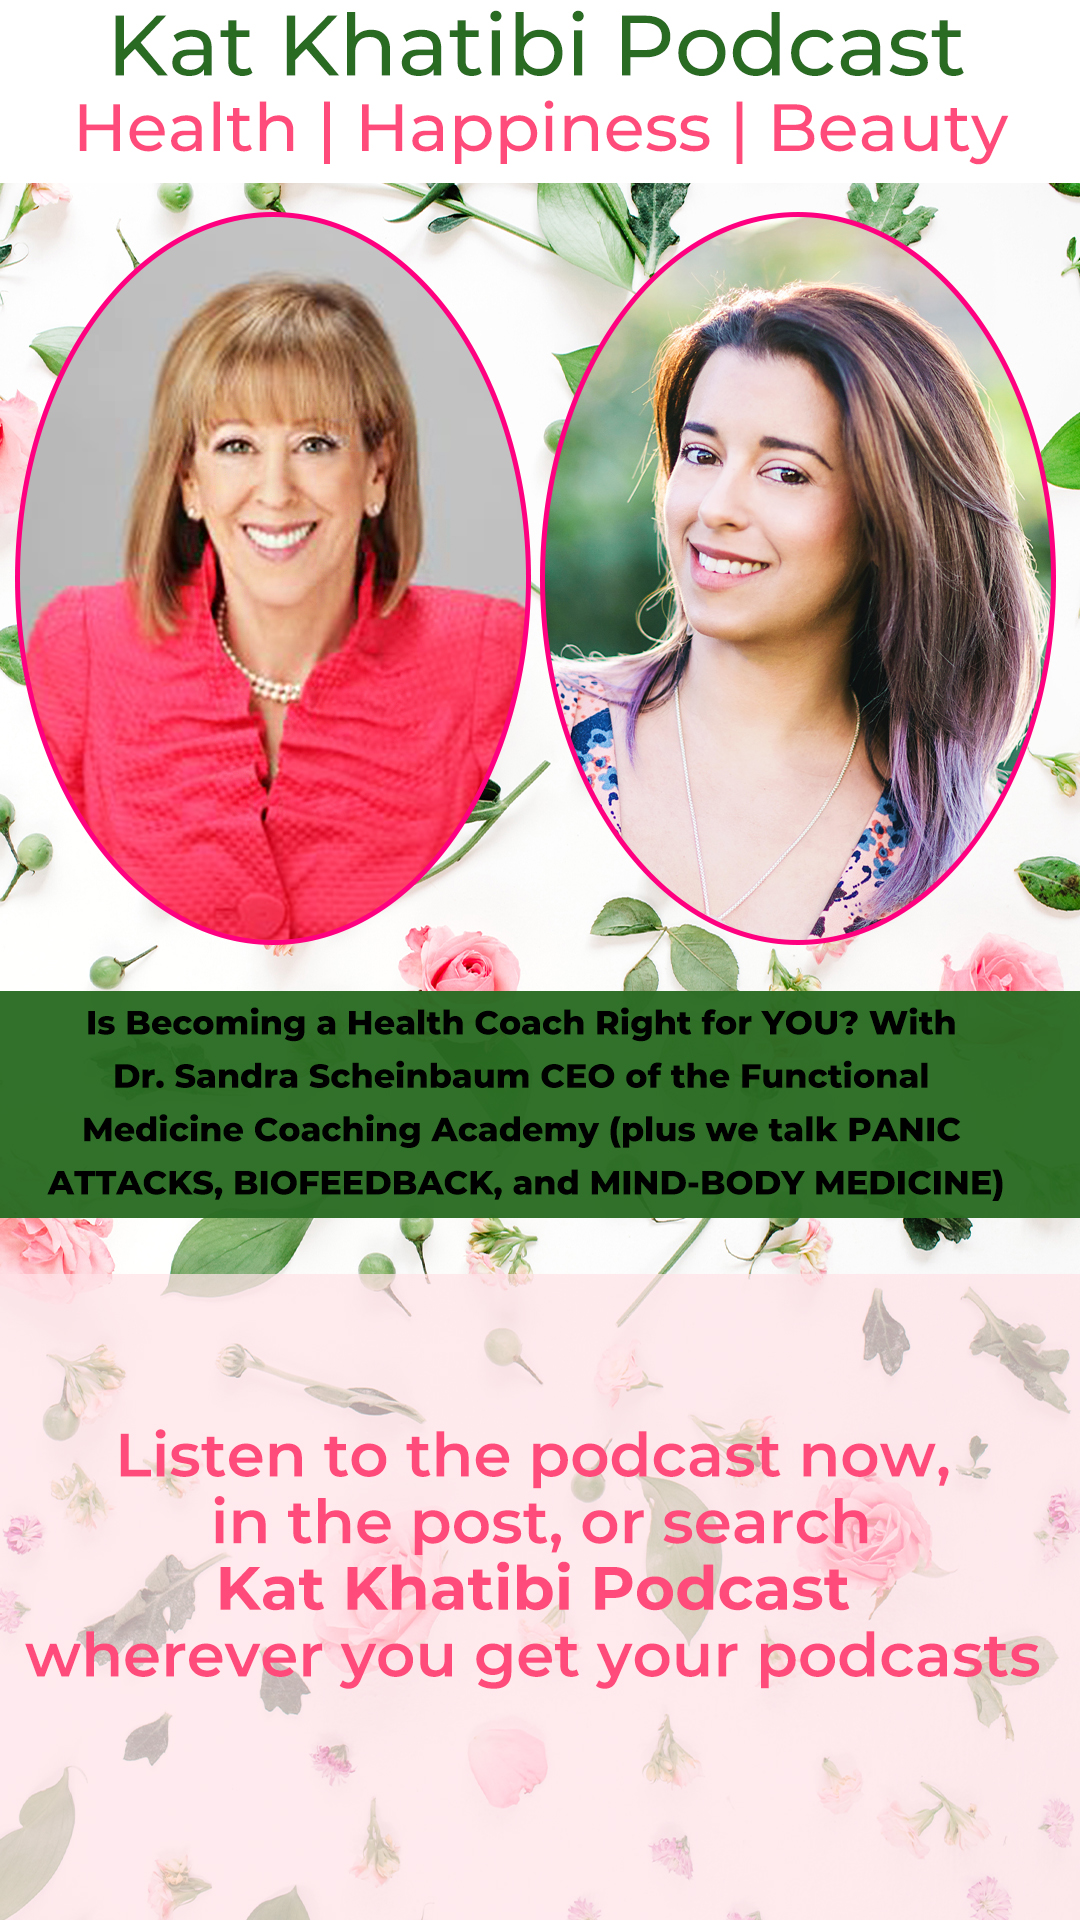 Is Becoming a Health Coach Right for YOU? With Dr. Sandra Scheinbaum CEO of the Functional Medicine Coaching Academy (plus we talk PANIC ATTACKS, BIOFEEDBACK, and MIND-BODY MEDICINE)